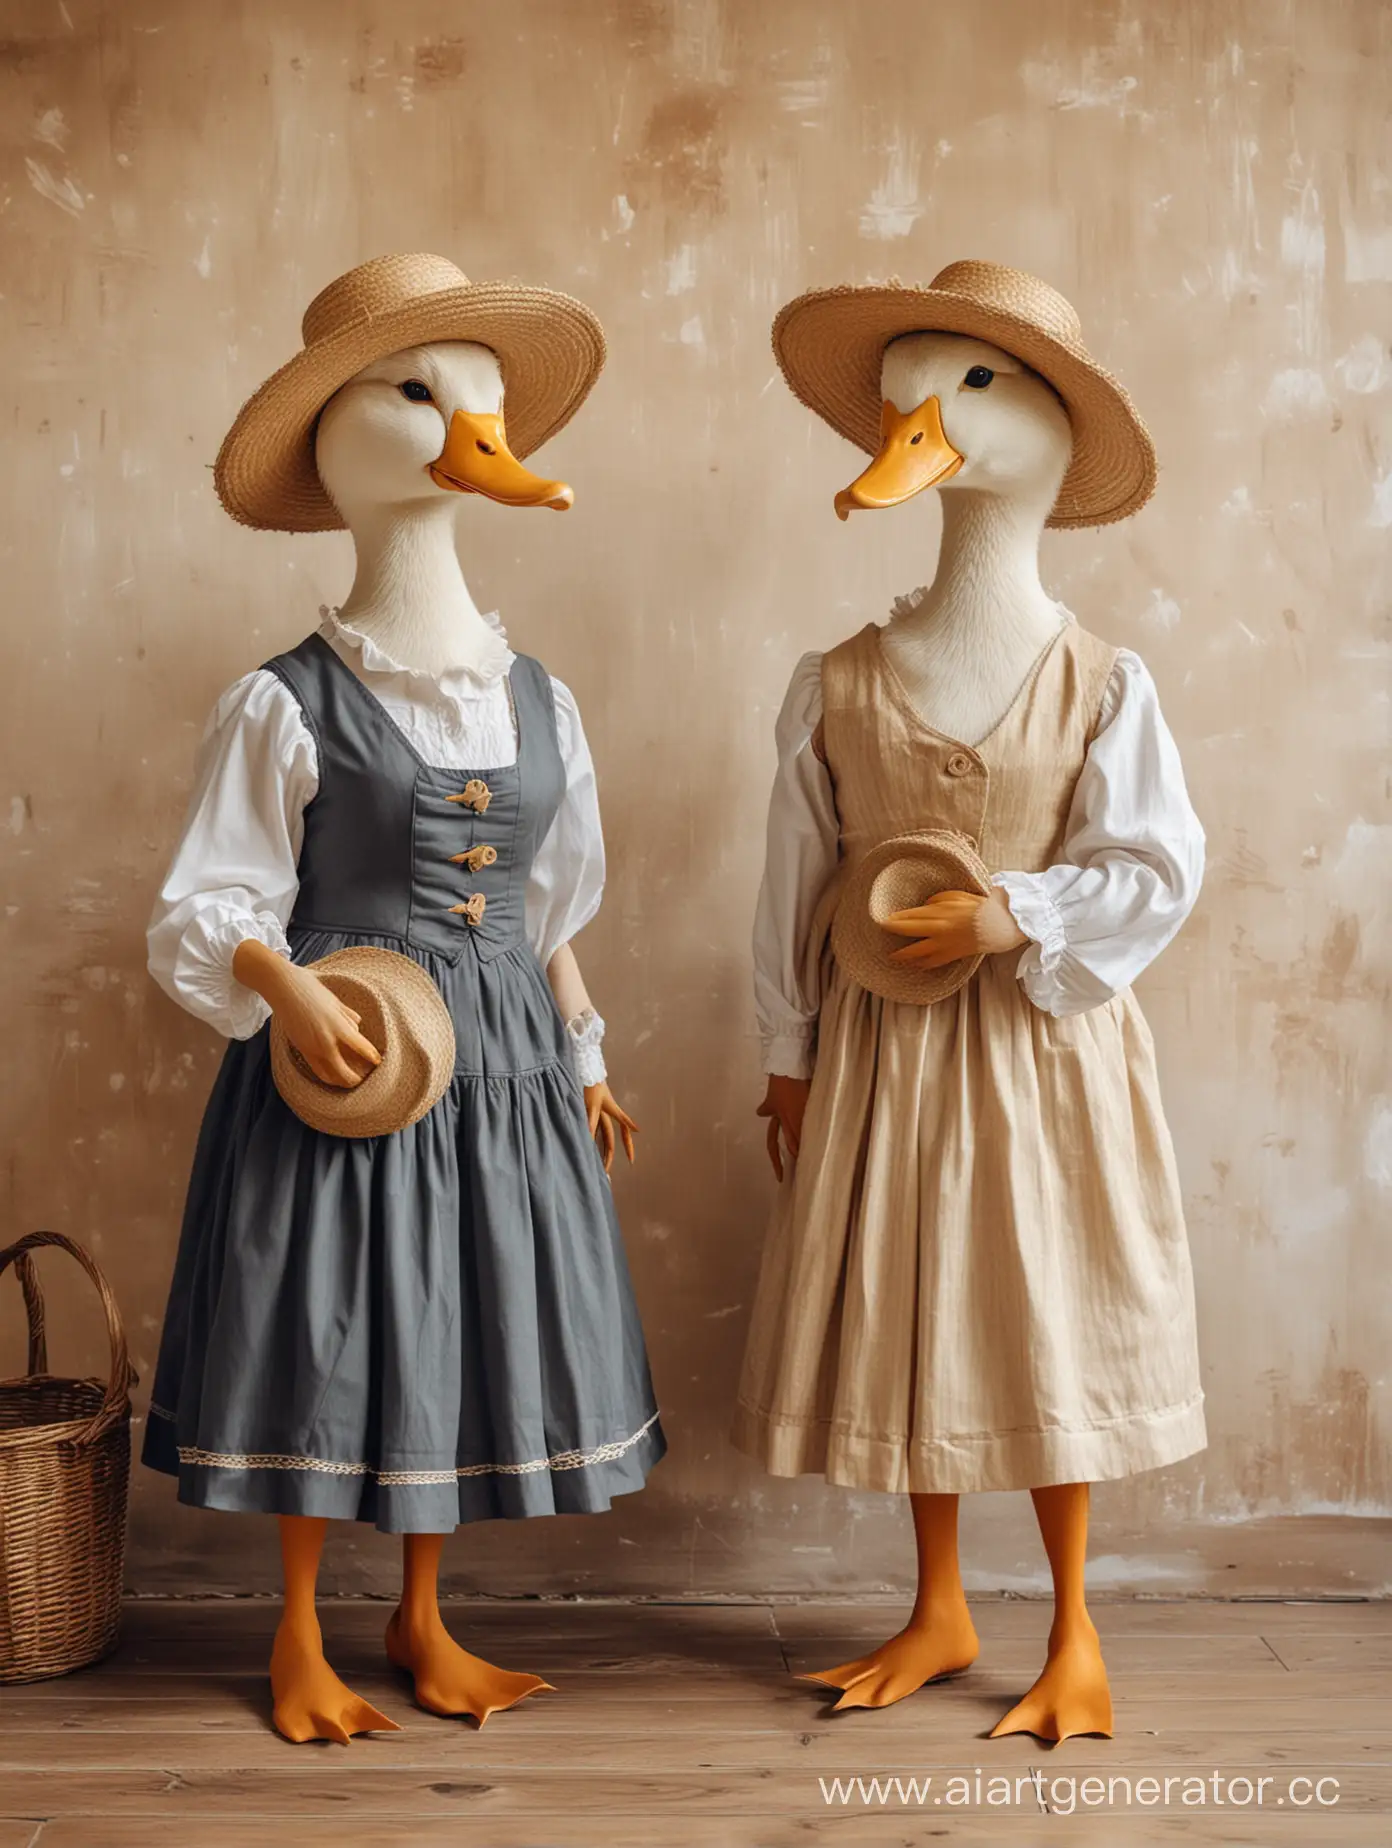 Ducks-in-Stylish-Outfits-Admiring-Art-on-a-Wall